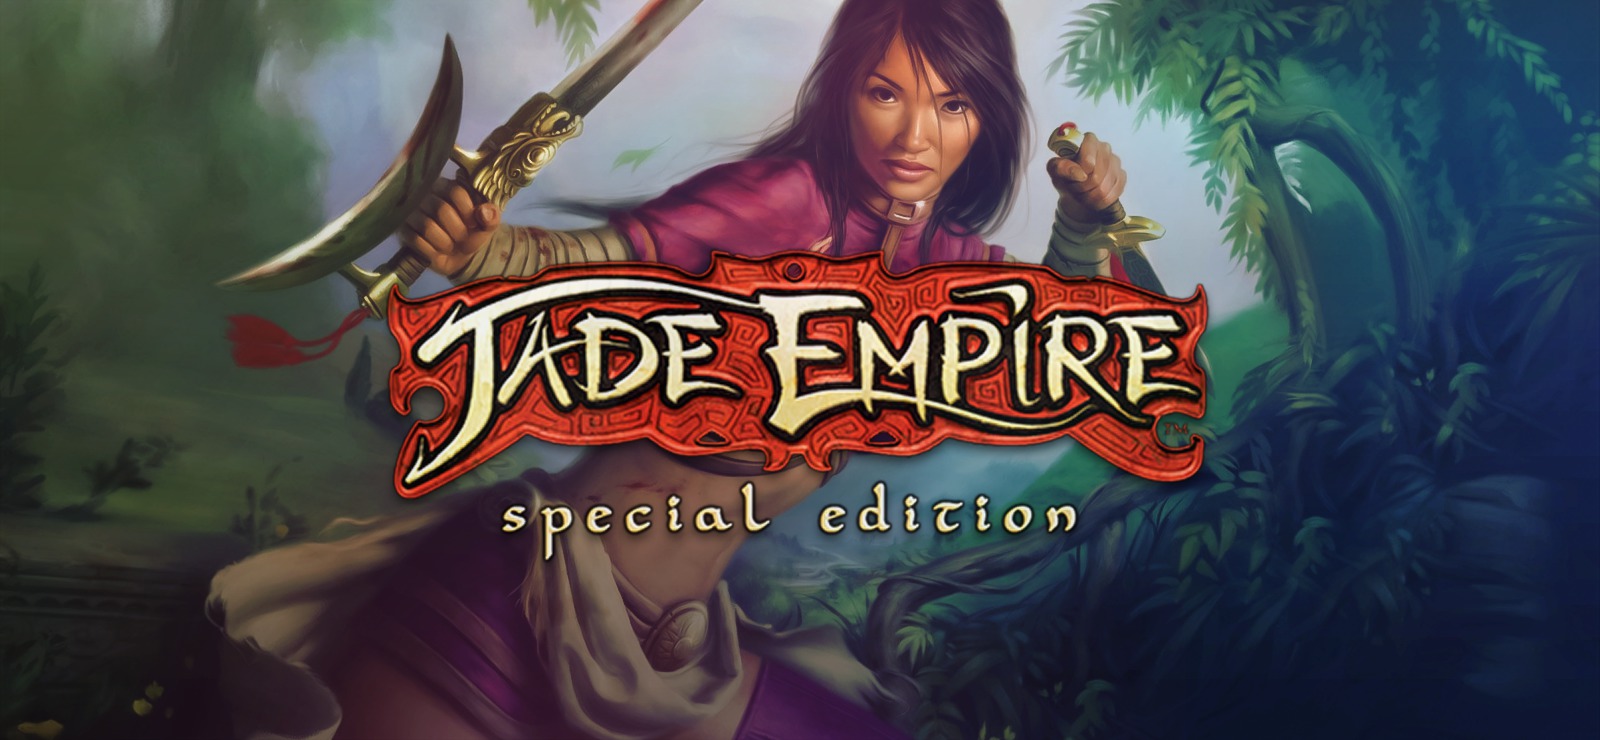 Amazing Jade Empire Pictures & Backgrounds